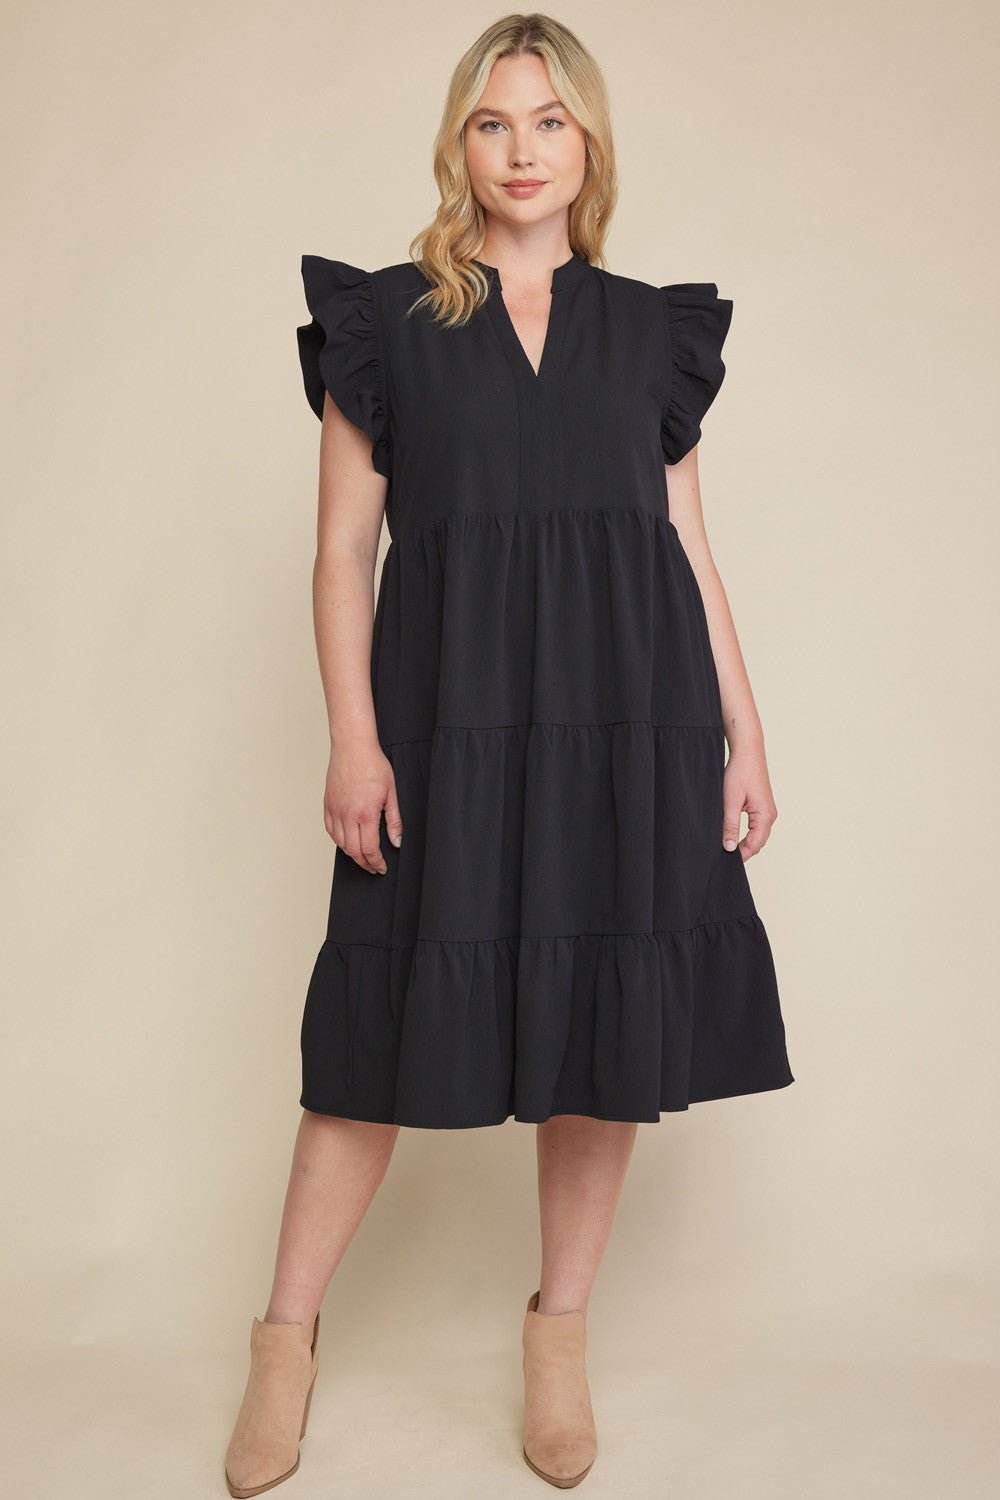 V-Neck Ruffle Sleeve Tiered Midi Dress with Pockets in Plus Size by Entro Clothing